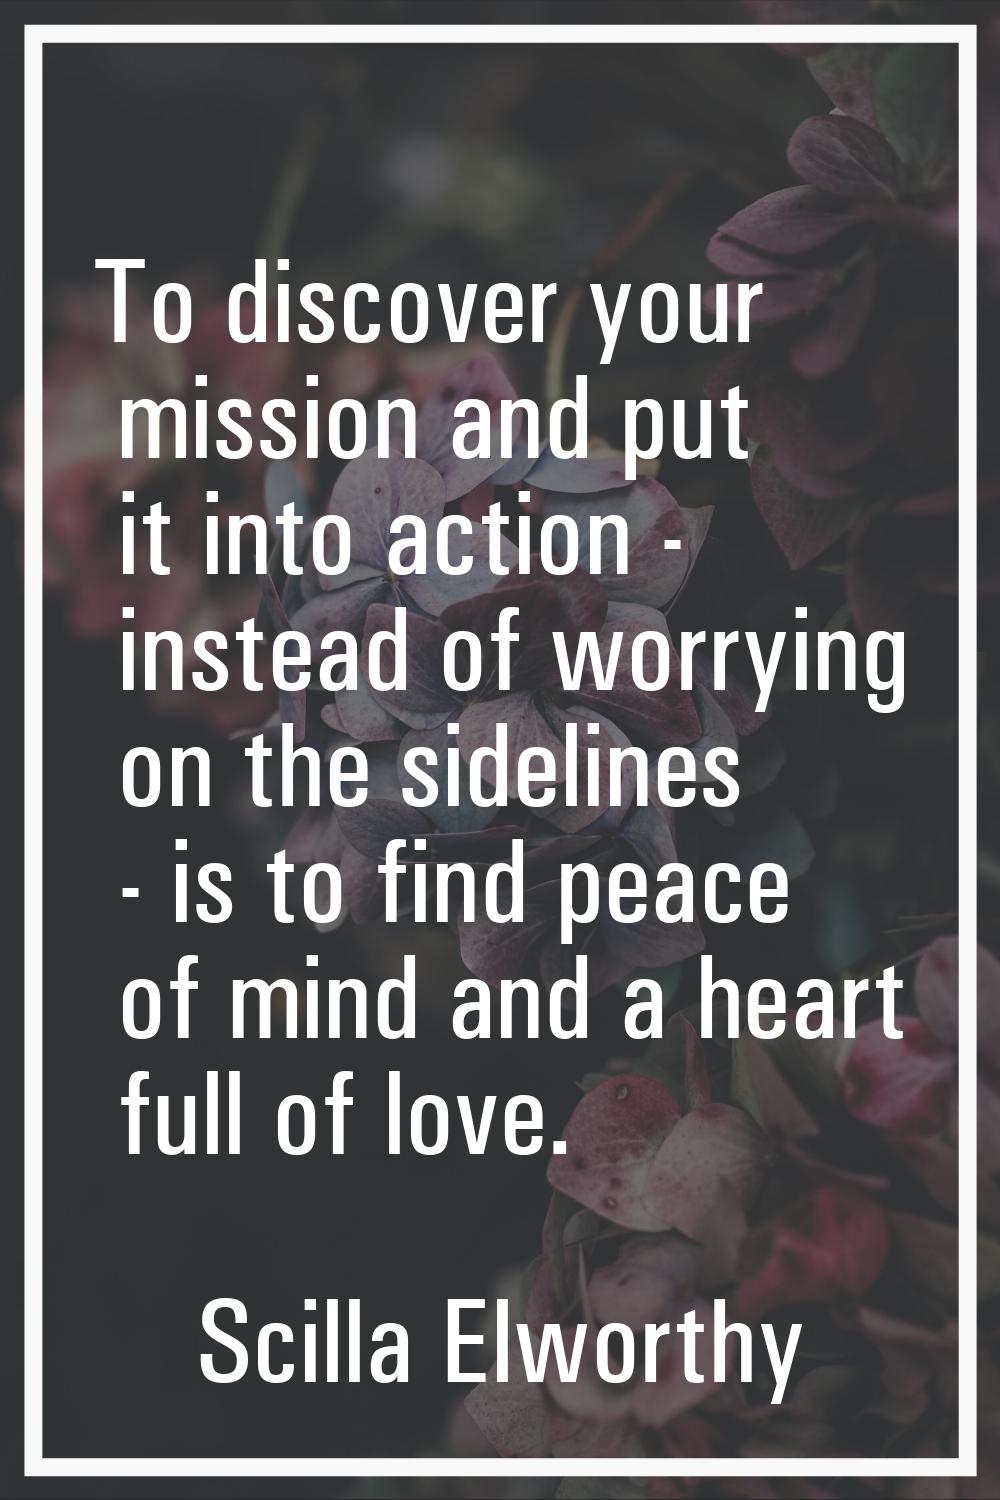 To discover your mission and put it into action - instead of worrying on the sidelines - is to find